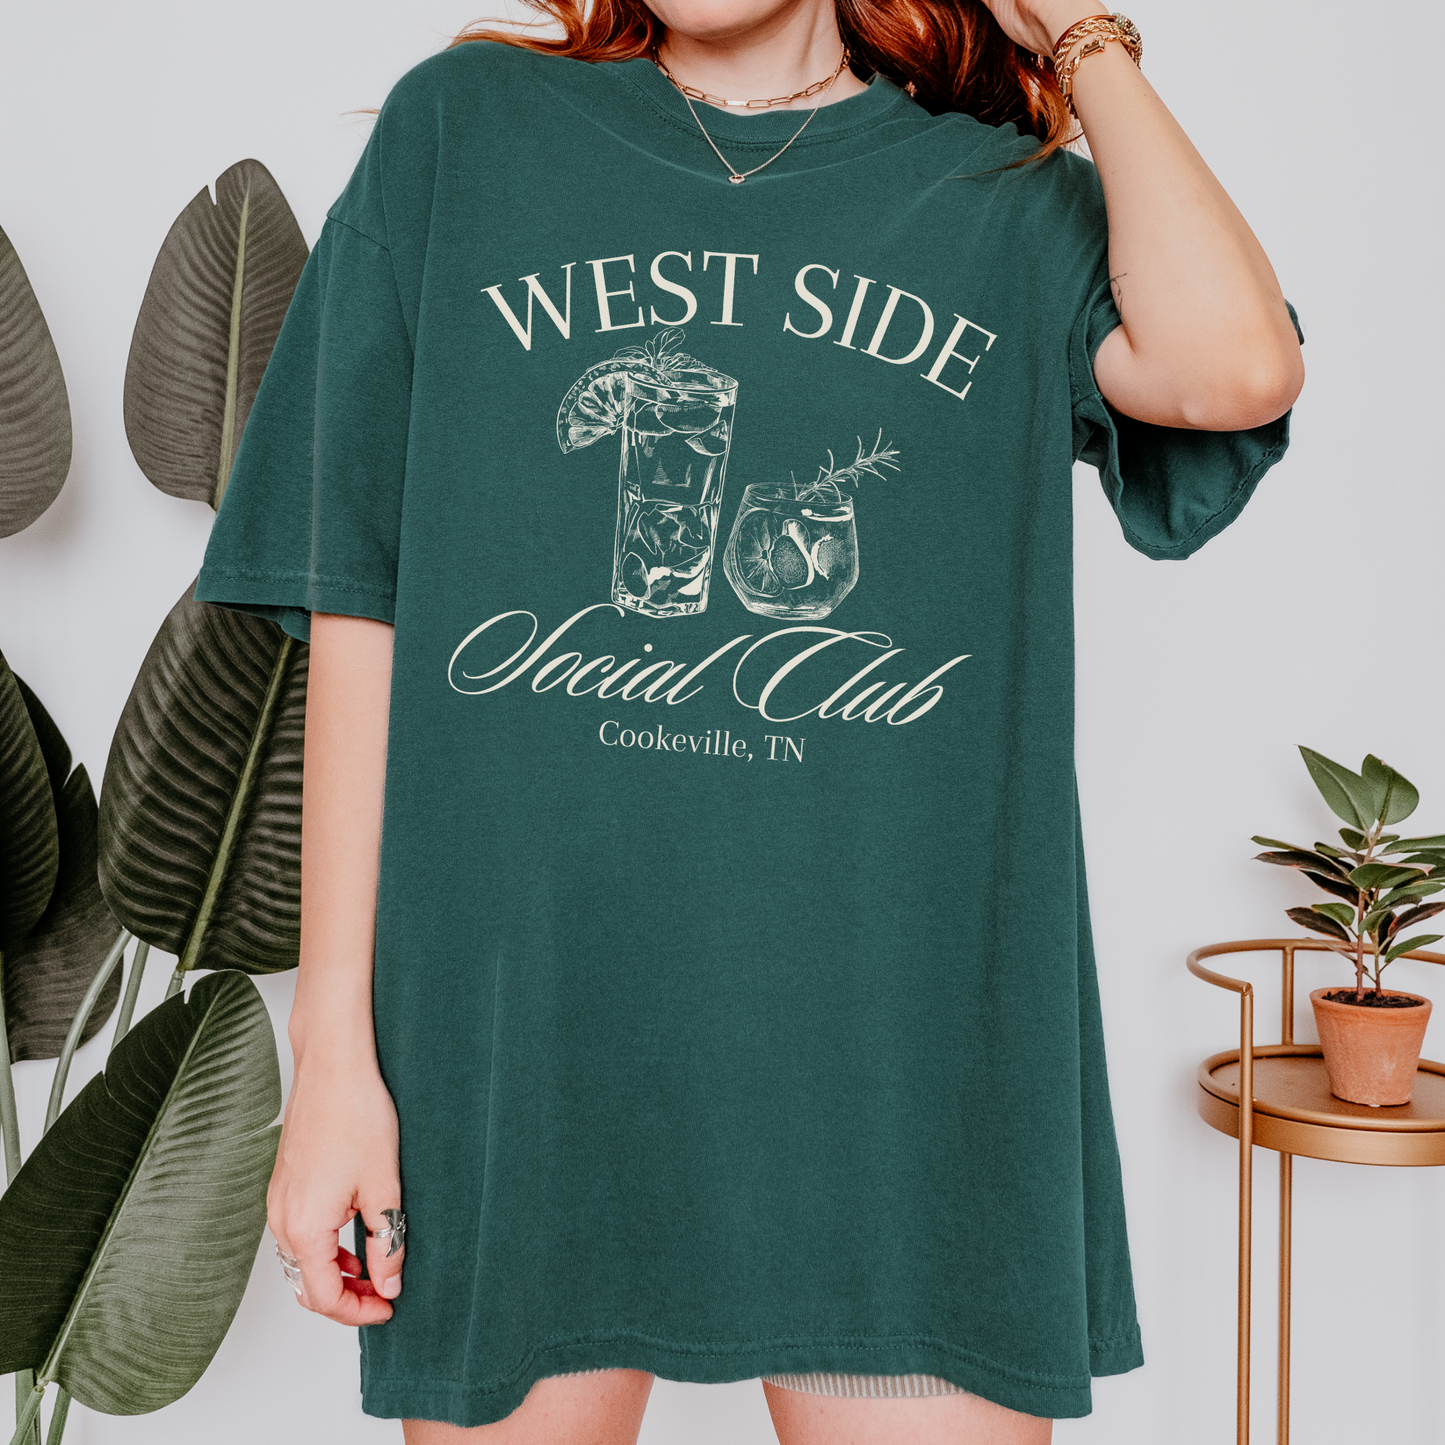 West Side Social Club Cookeville, TN Tee (Customizable)